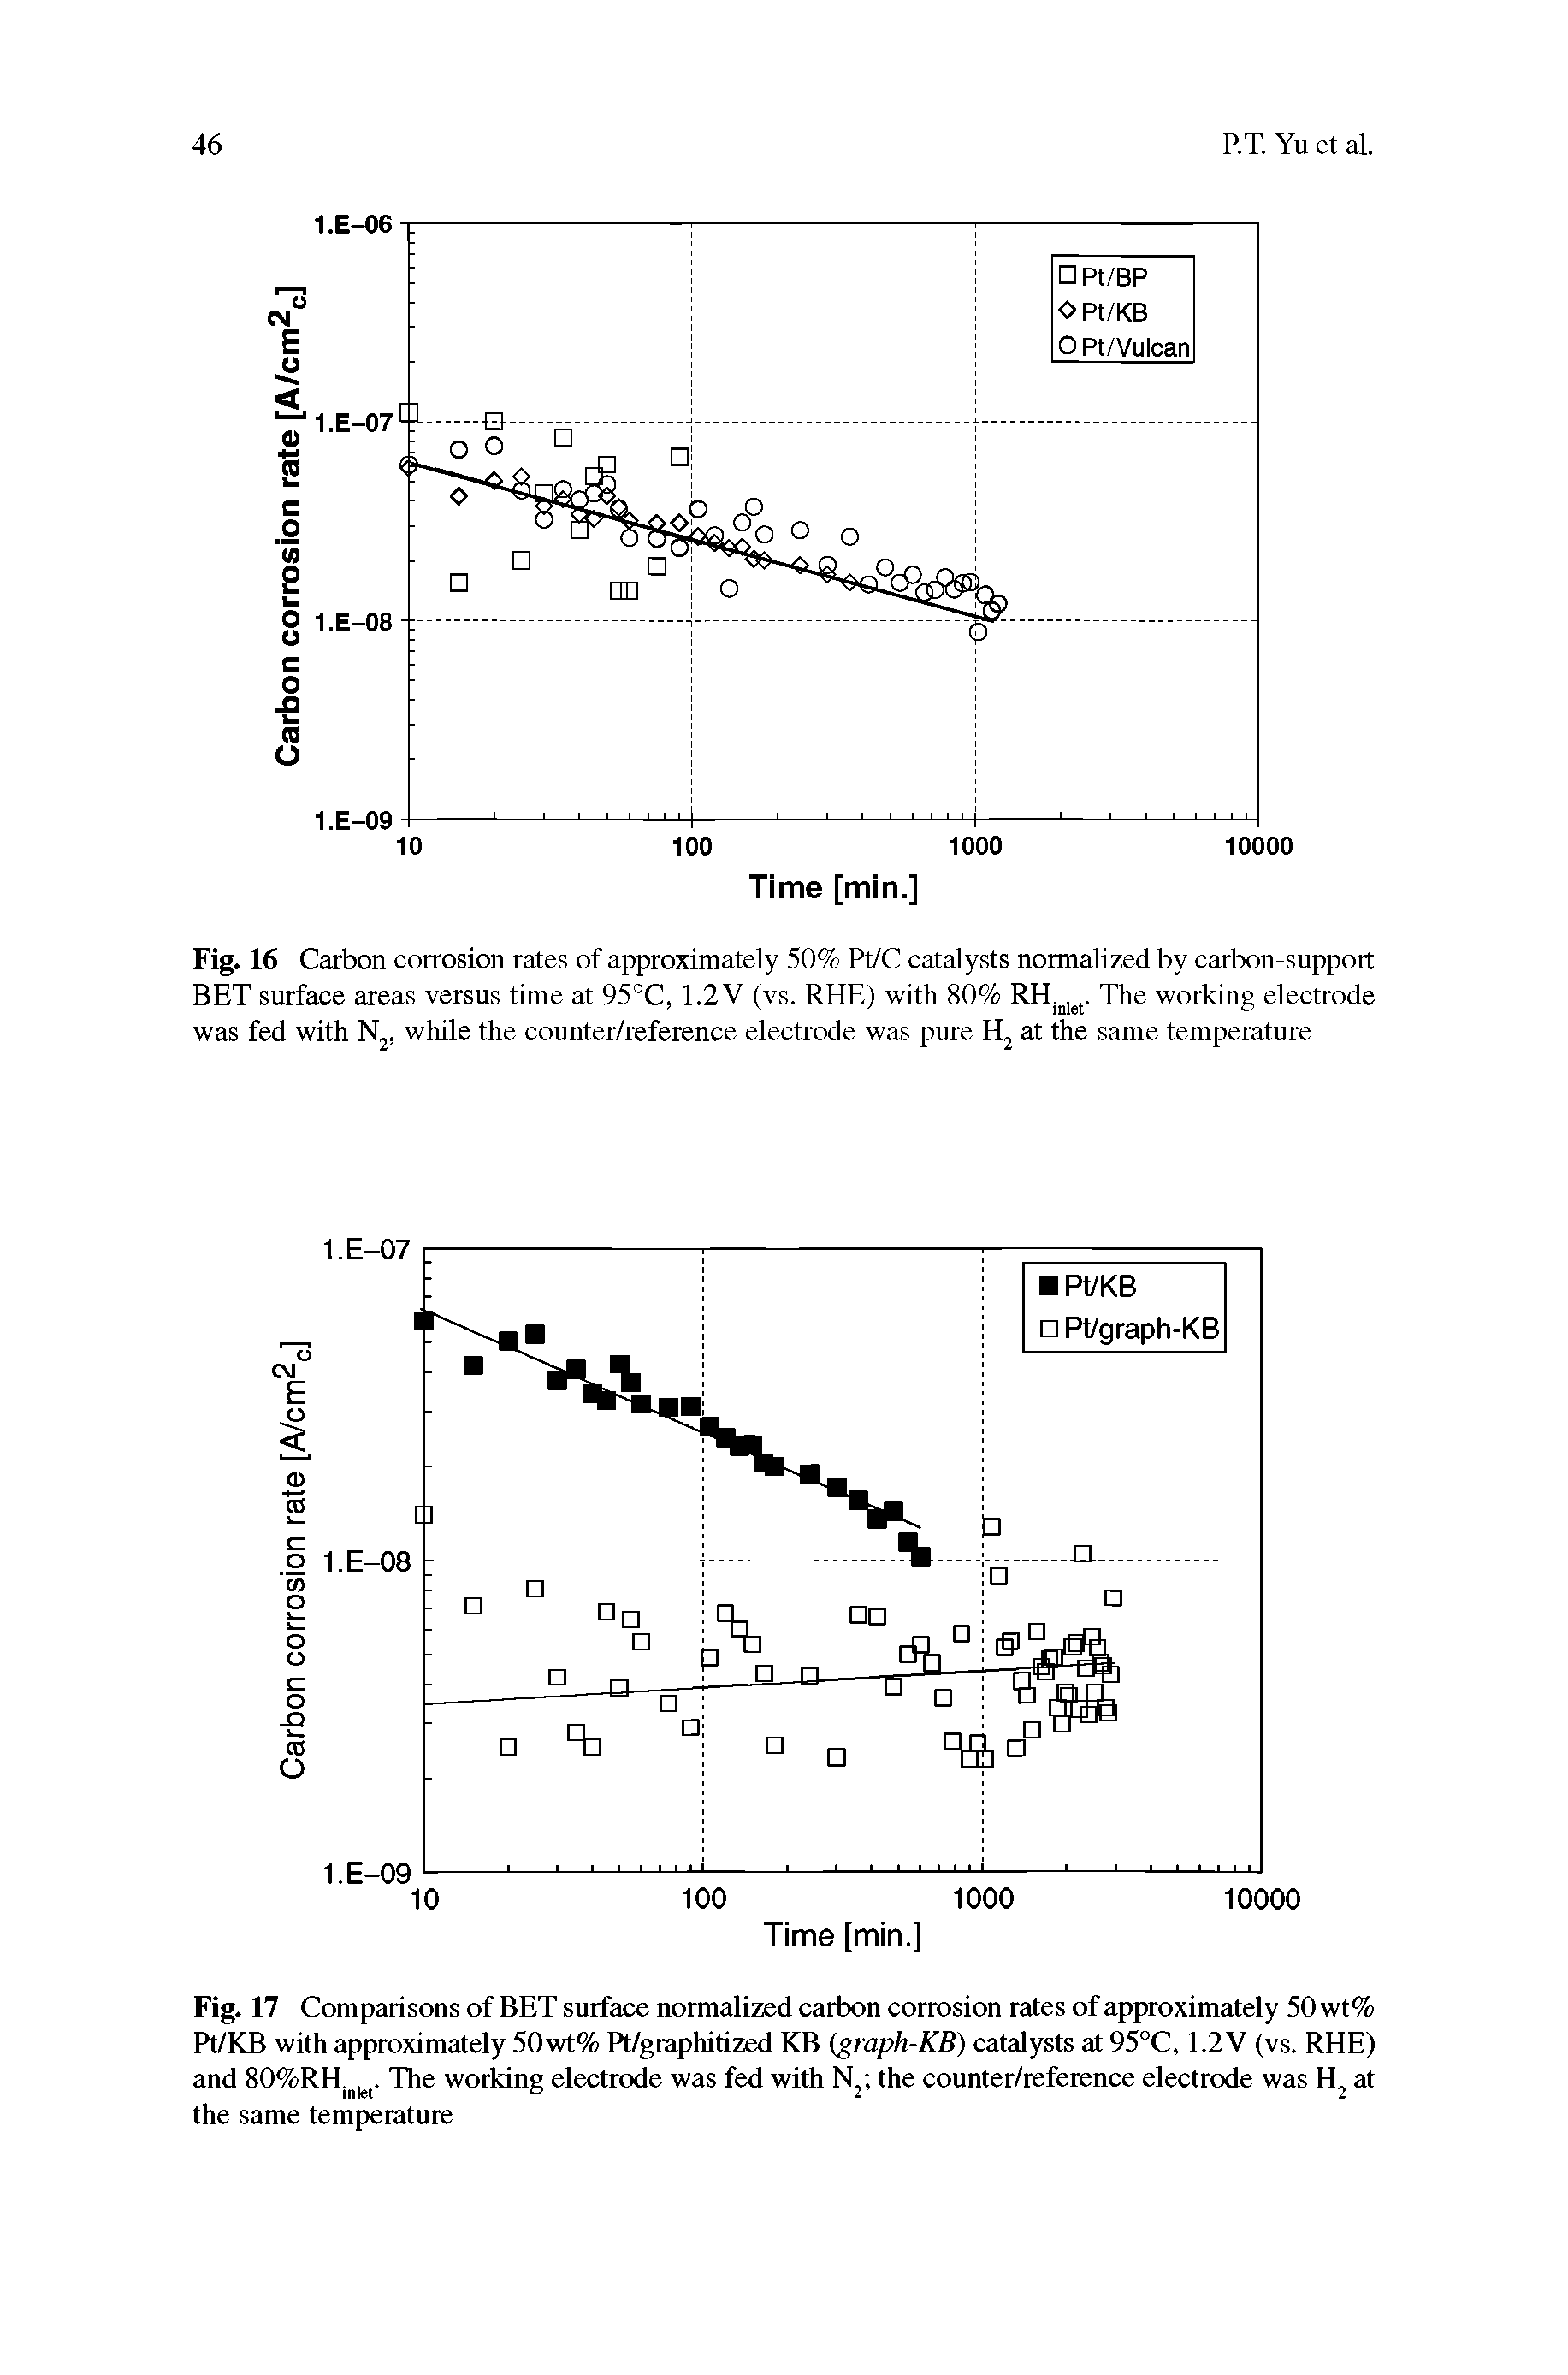 Fig. 17 Comptirisons of BET surface normalized carbon corrosion rates of approximately 50 wt% Pt/KB with approximately 50wt% Pt/graphitized KB (graph-KB) catalysts at 95°C, 1.2 V (vs. RHE) and 80%RH. y. The working electrode was fed with N the counter/reference electrode was at the same temperature...